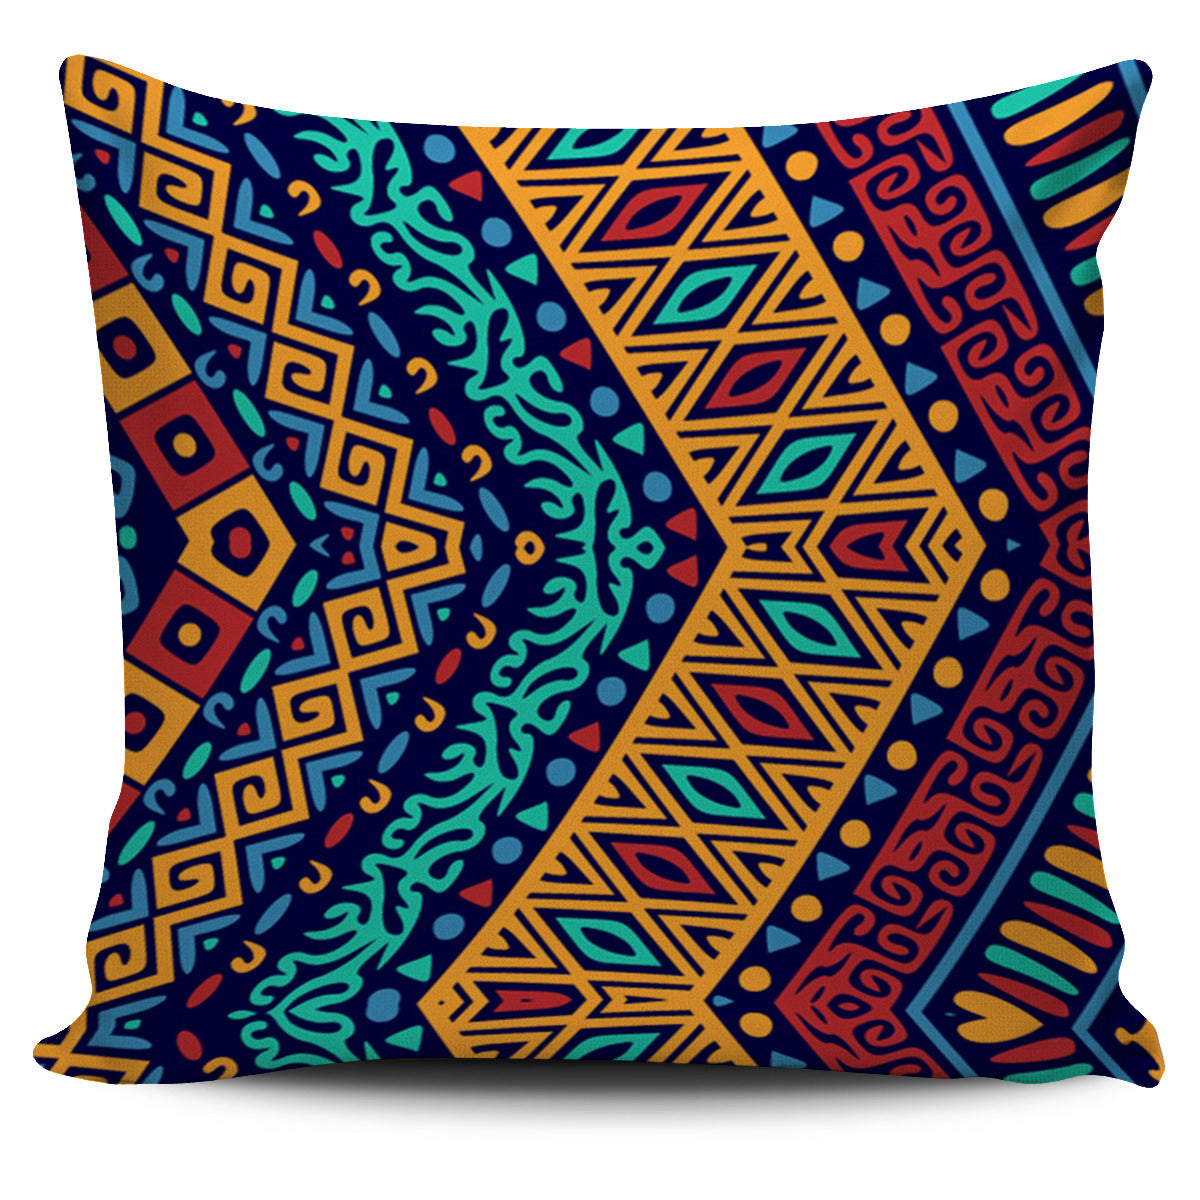 Blue Boho Patterned Pillow Cover - JaZazzy 